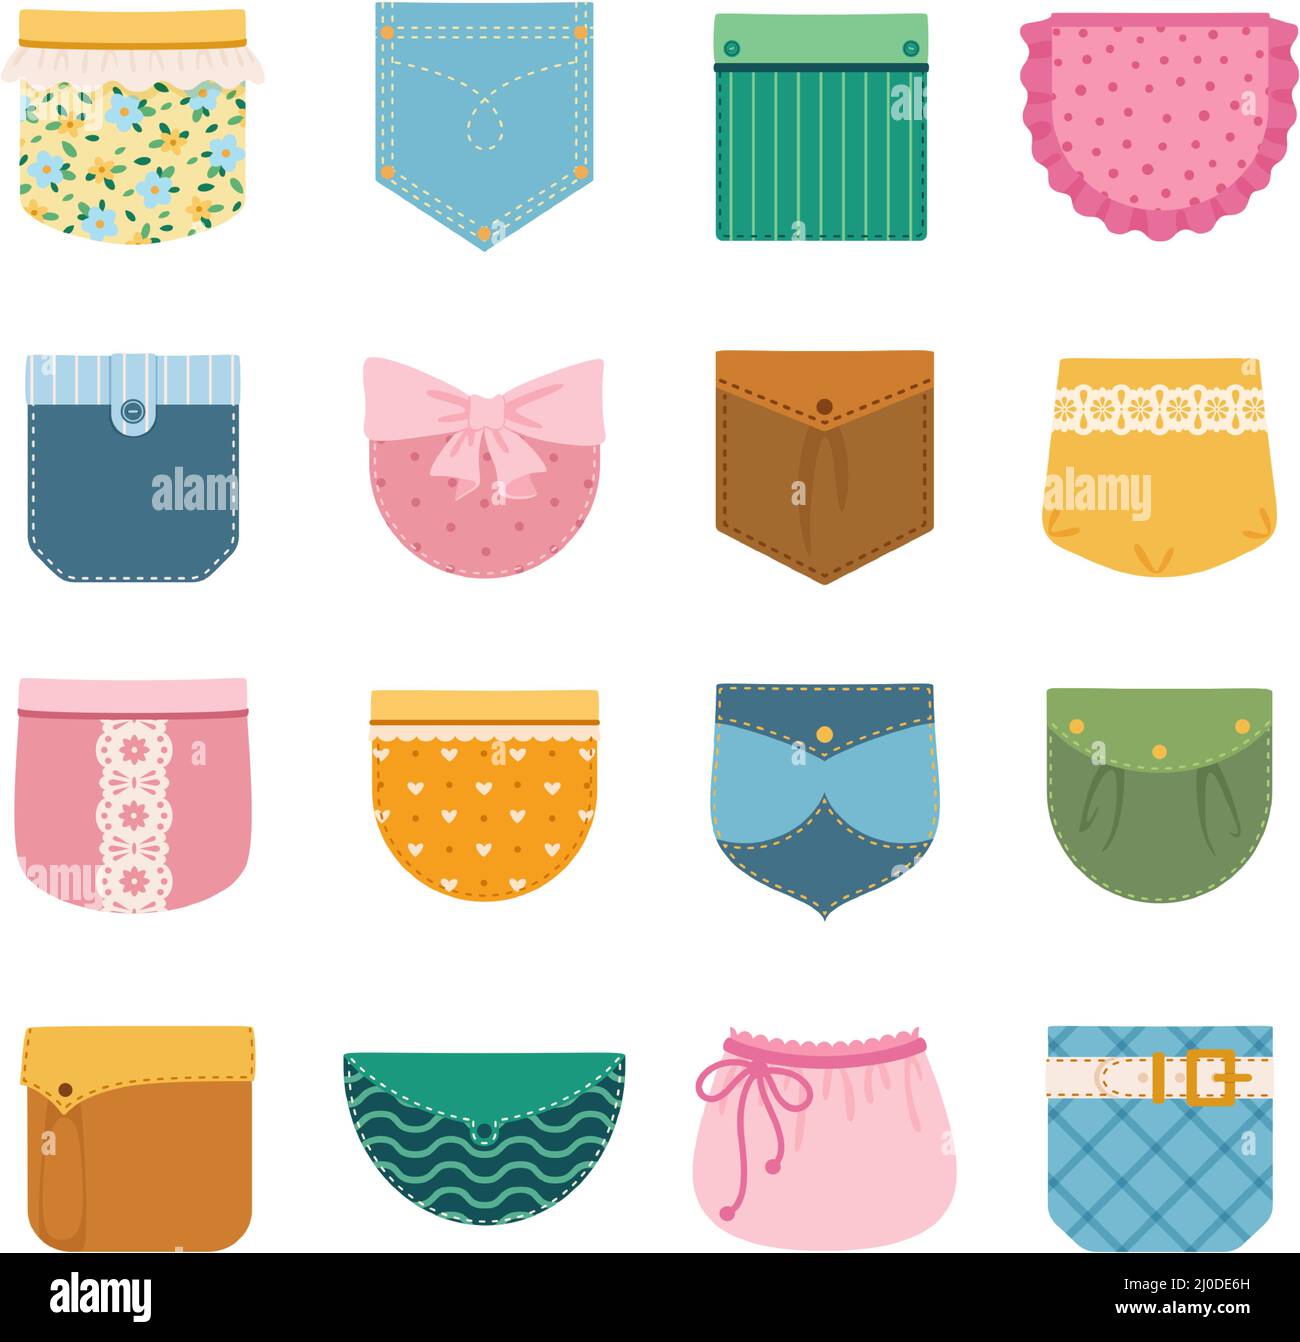 https://c8.alamy.com/comp/2J0DE6H/patch-pockets-for-clothes-jeans-fabric-pocket-for-pants-shirt-colorful-patches-with-stitches-and-buttons-clothing-decor-element-vector-set-female-and-male-design-isolated-on-white-2J0DE6H.jpg